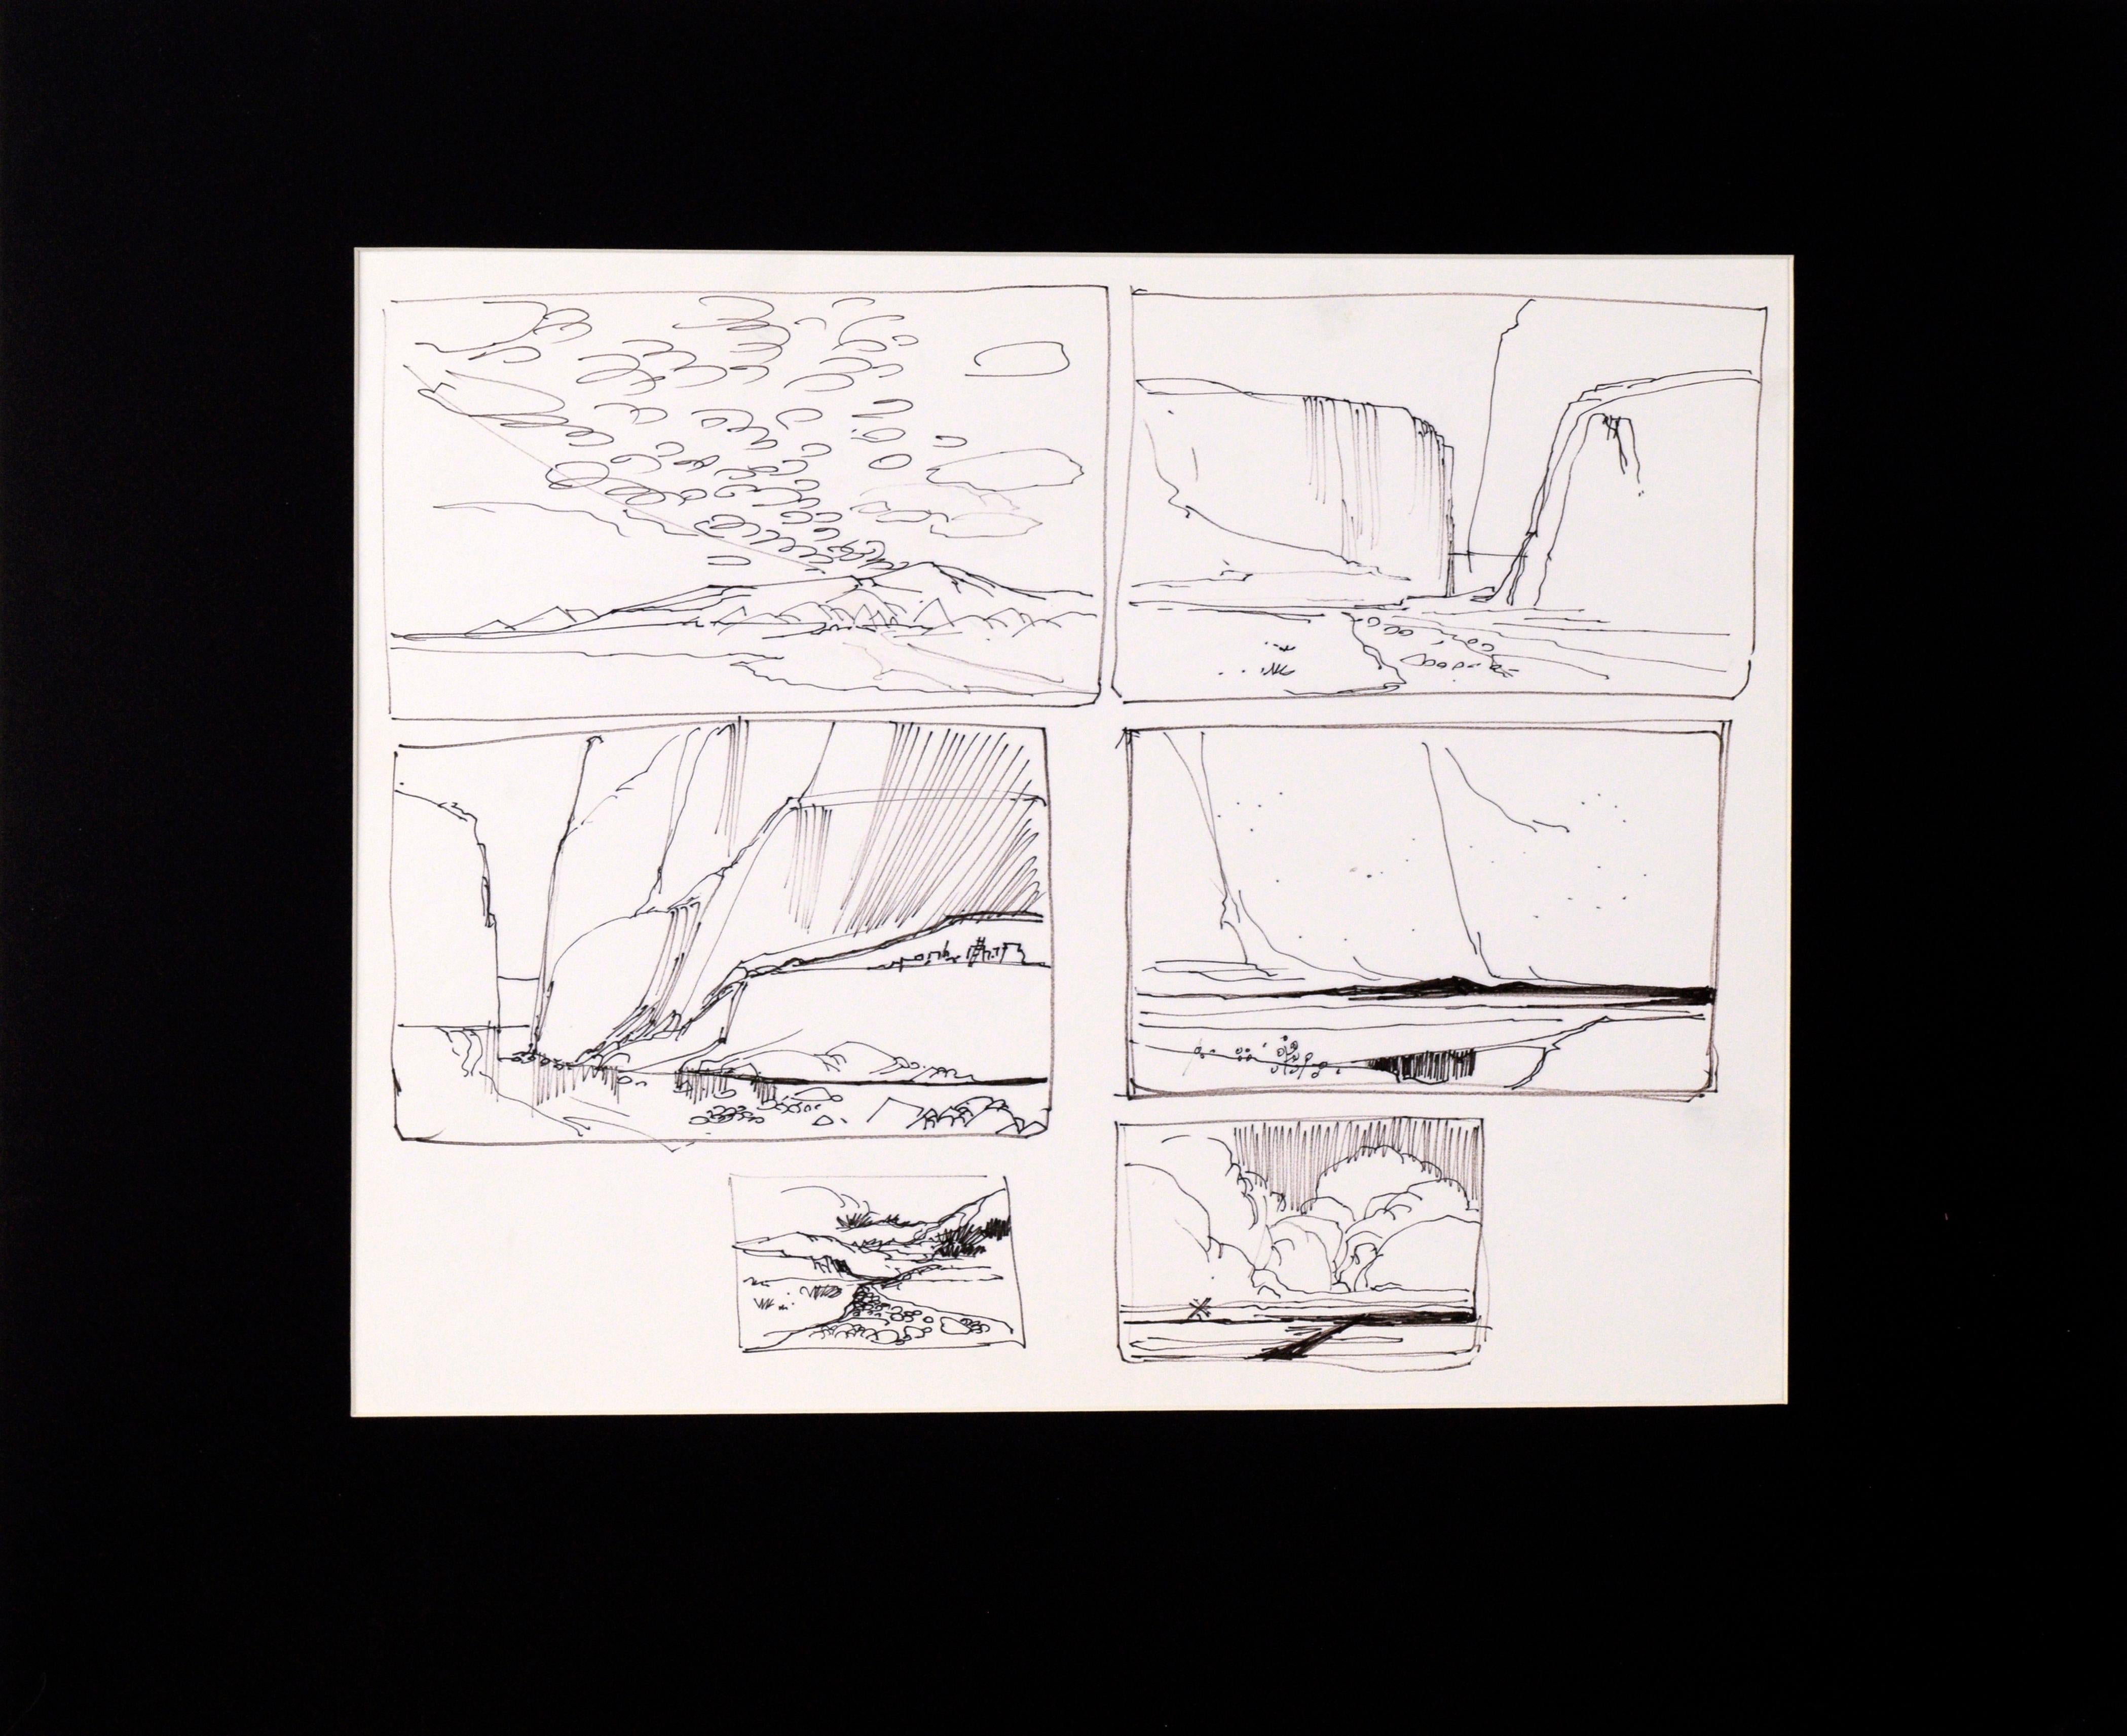 Laurence Sisson Landscape Art - Six-Panel Thumbnail Sketches of Desert and Canyon Landscapes in Ink on Paper